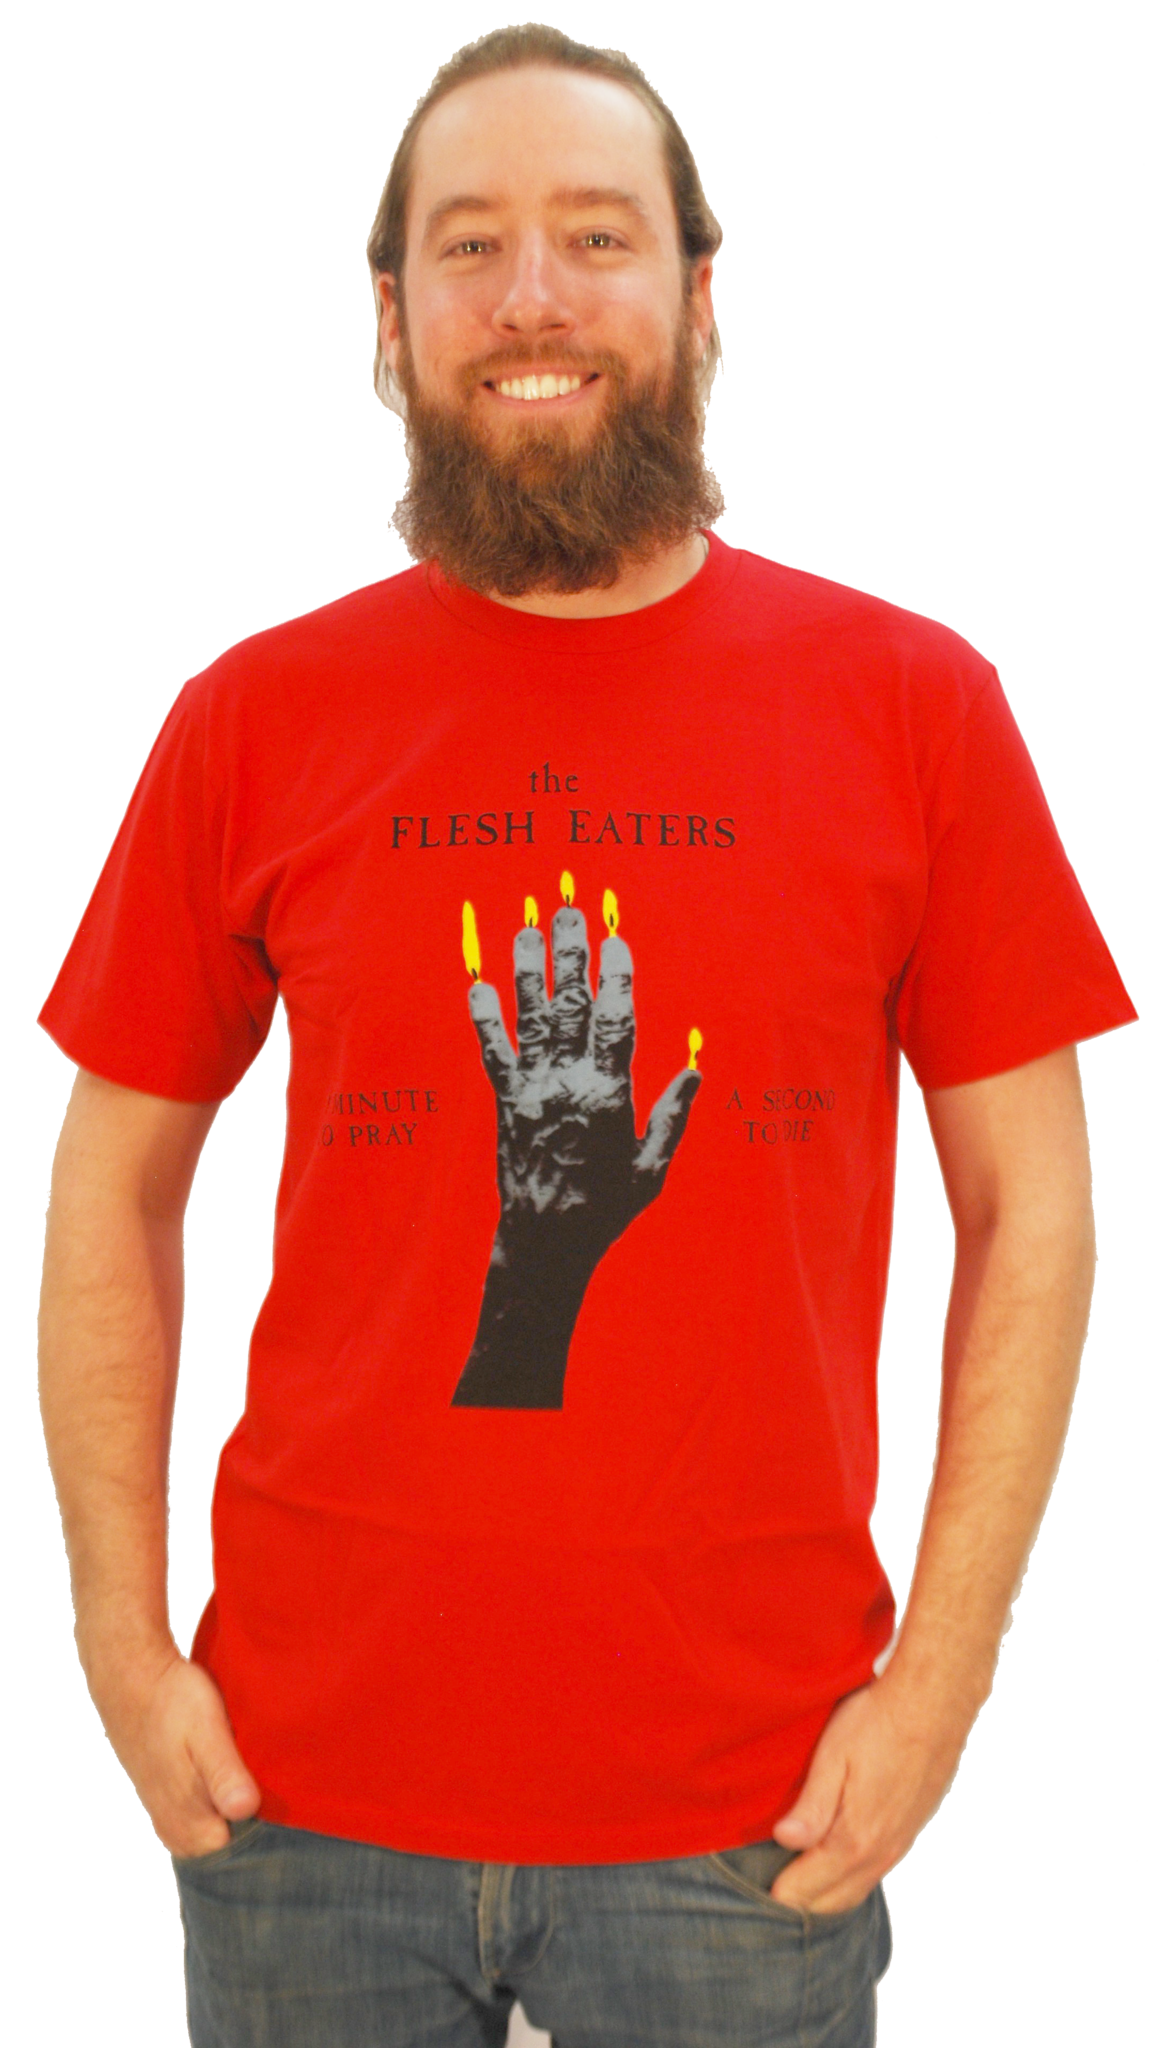 FLESH EATERS - "A MINUTE TO PRAY, A SECOND TO DIE" T-SHIRT